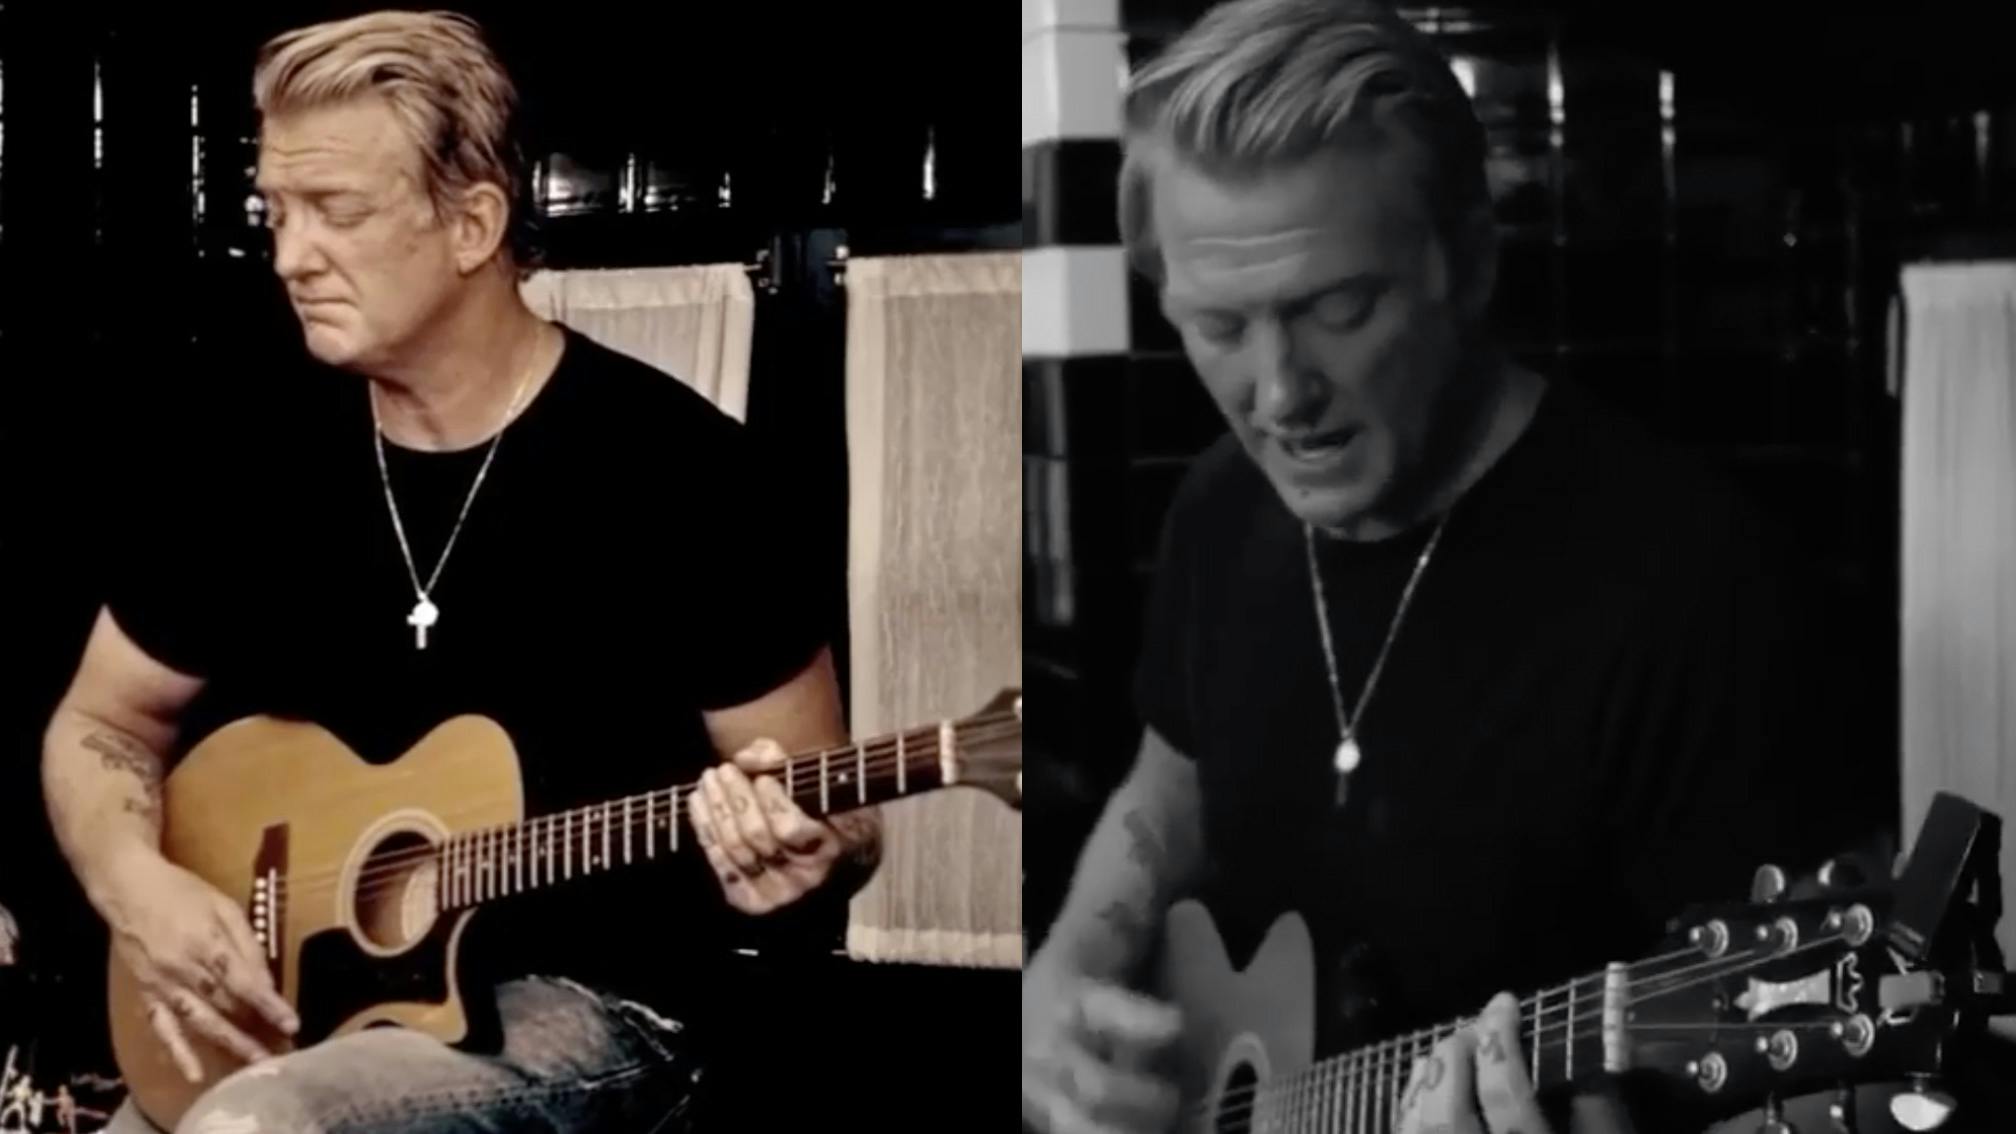 Watch Queens Of The Stone Age’s Josh Homme Perform In His Bathroom